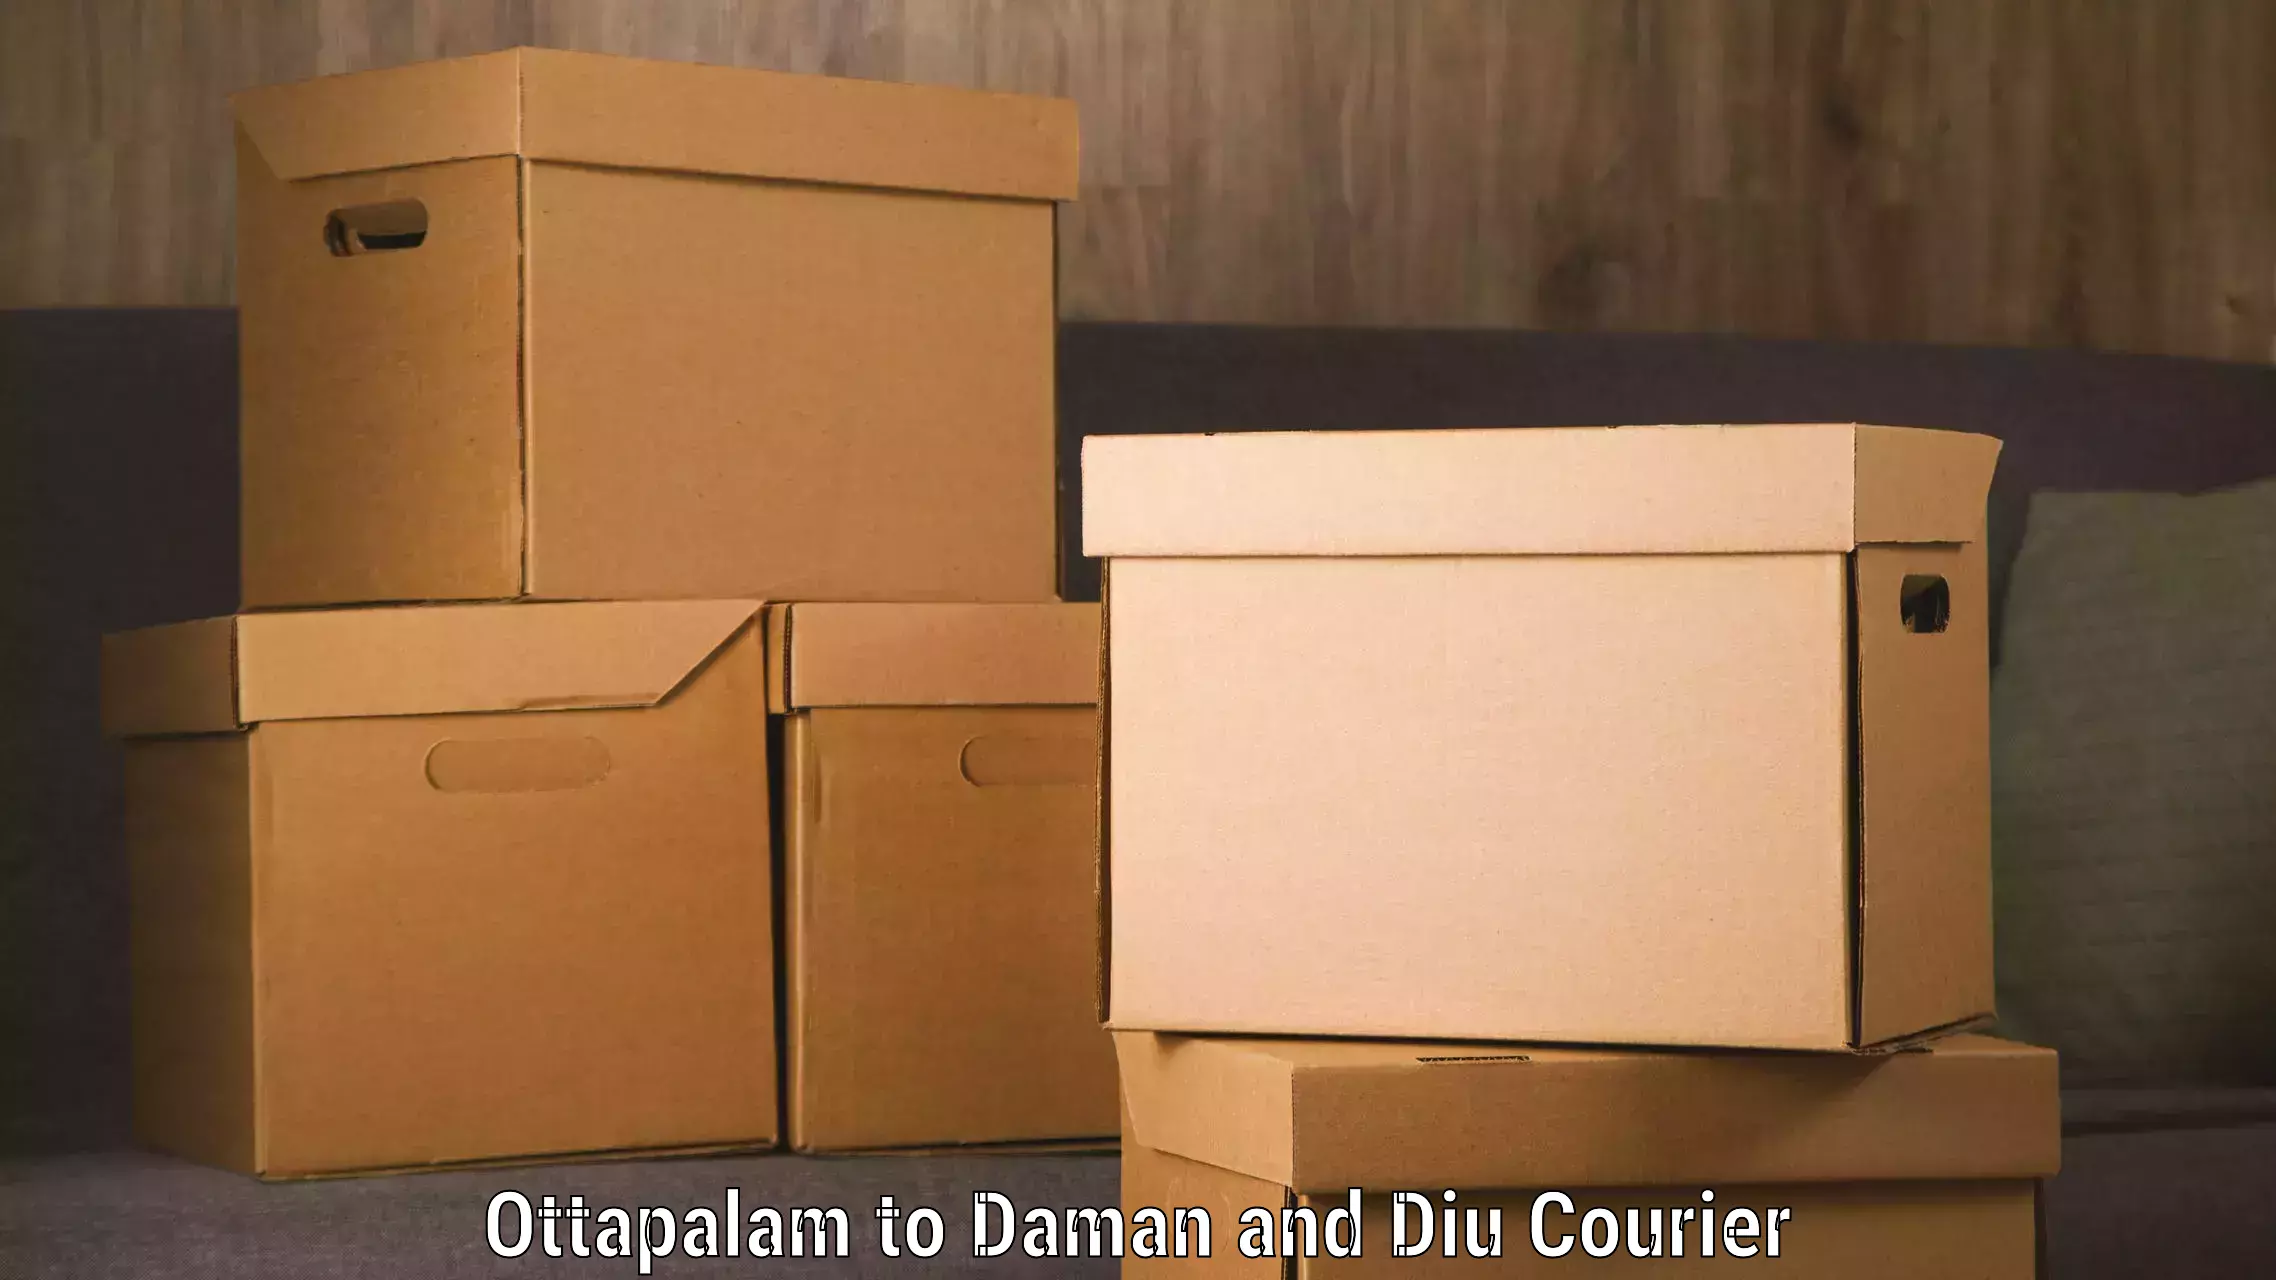 Doorstep delivery service Ottapalam to Diu